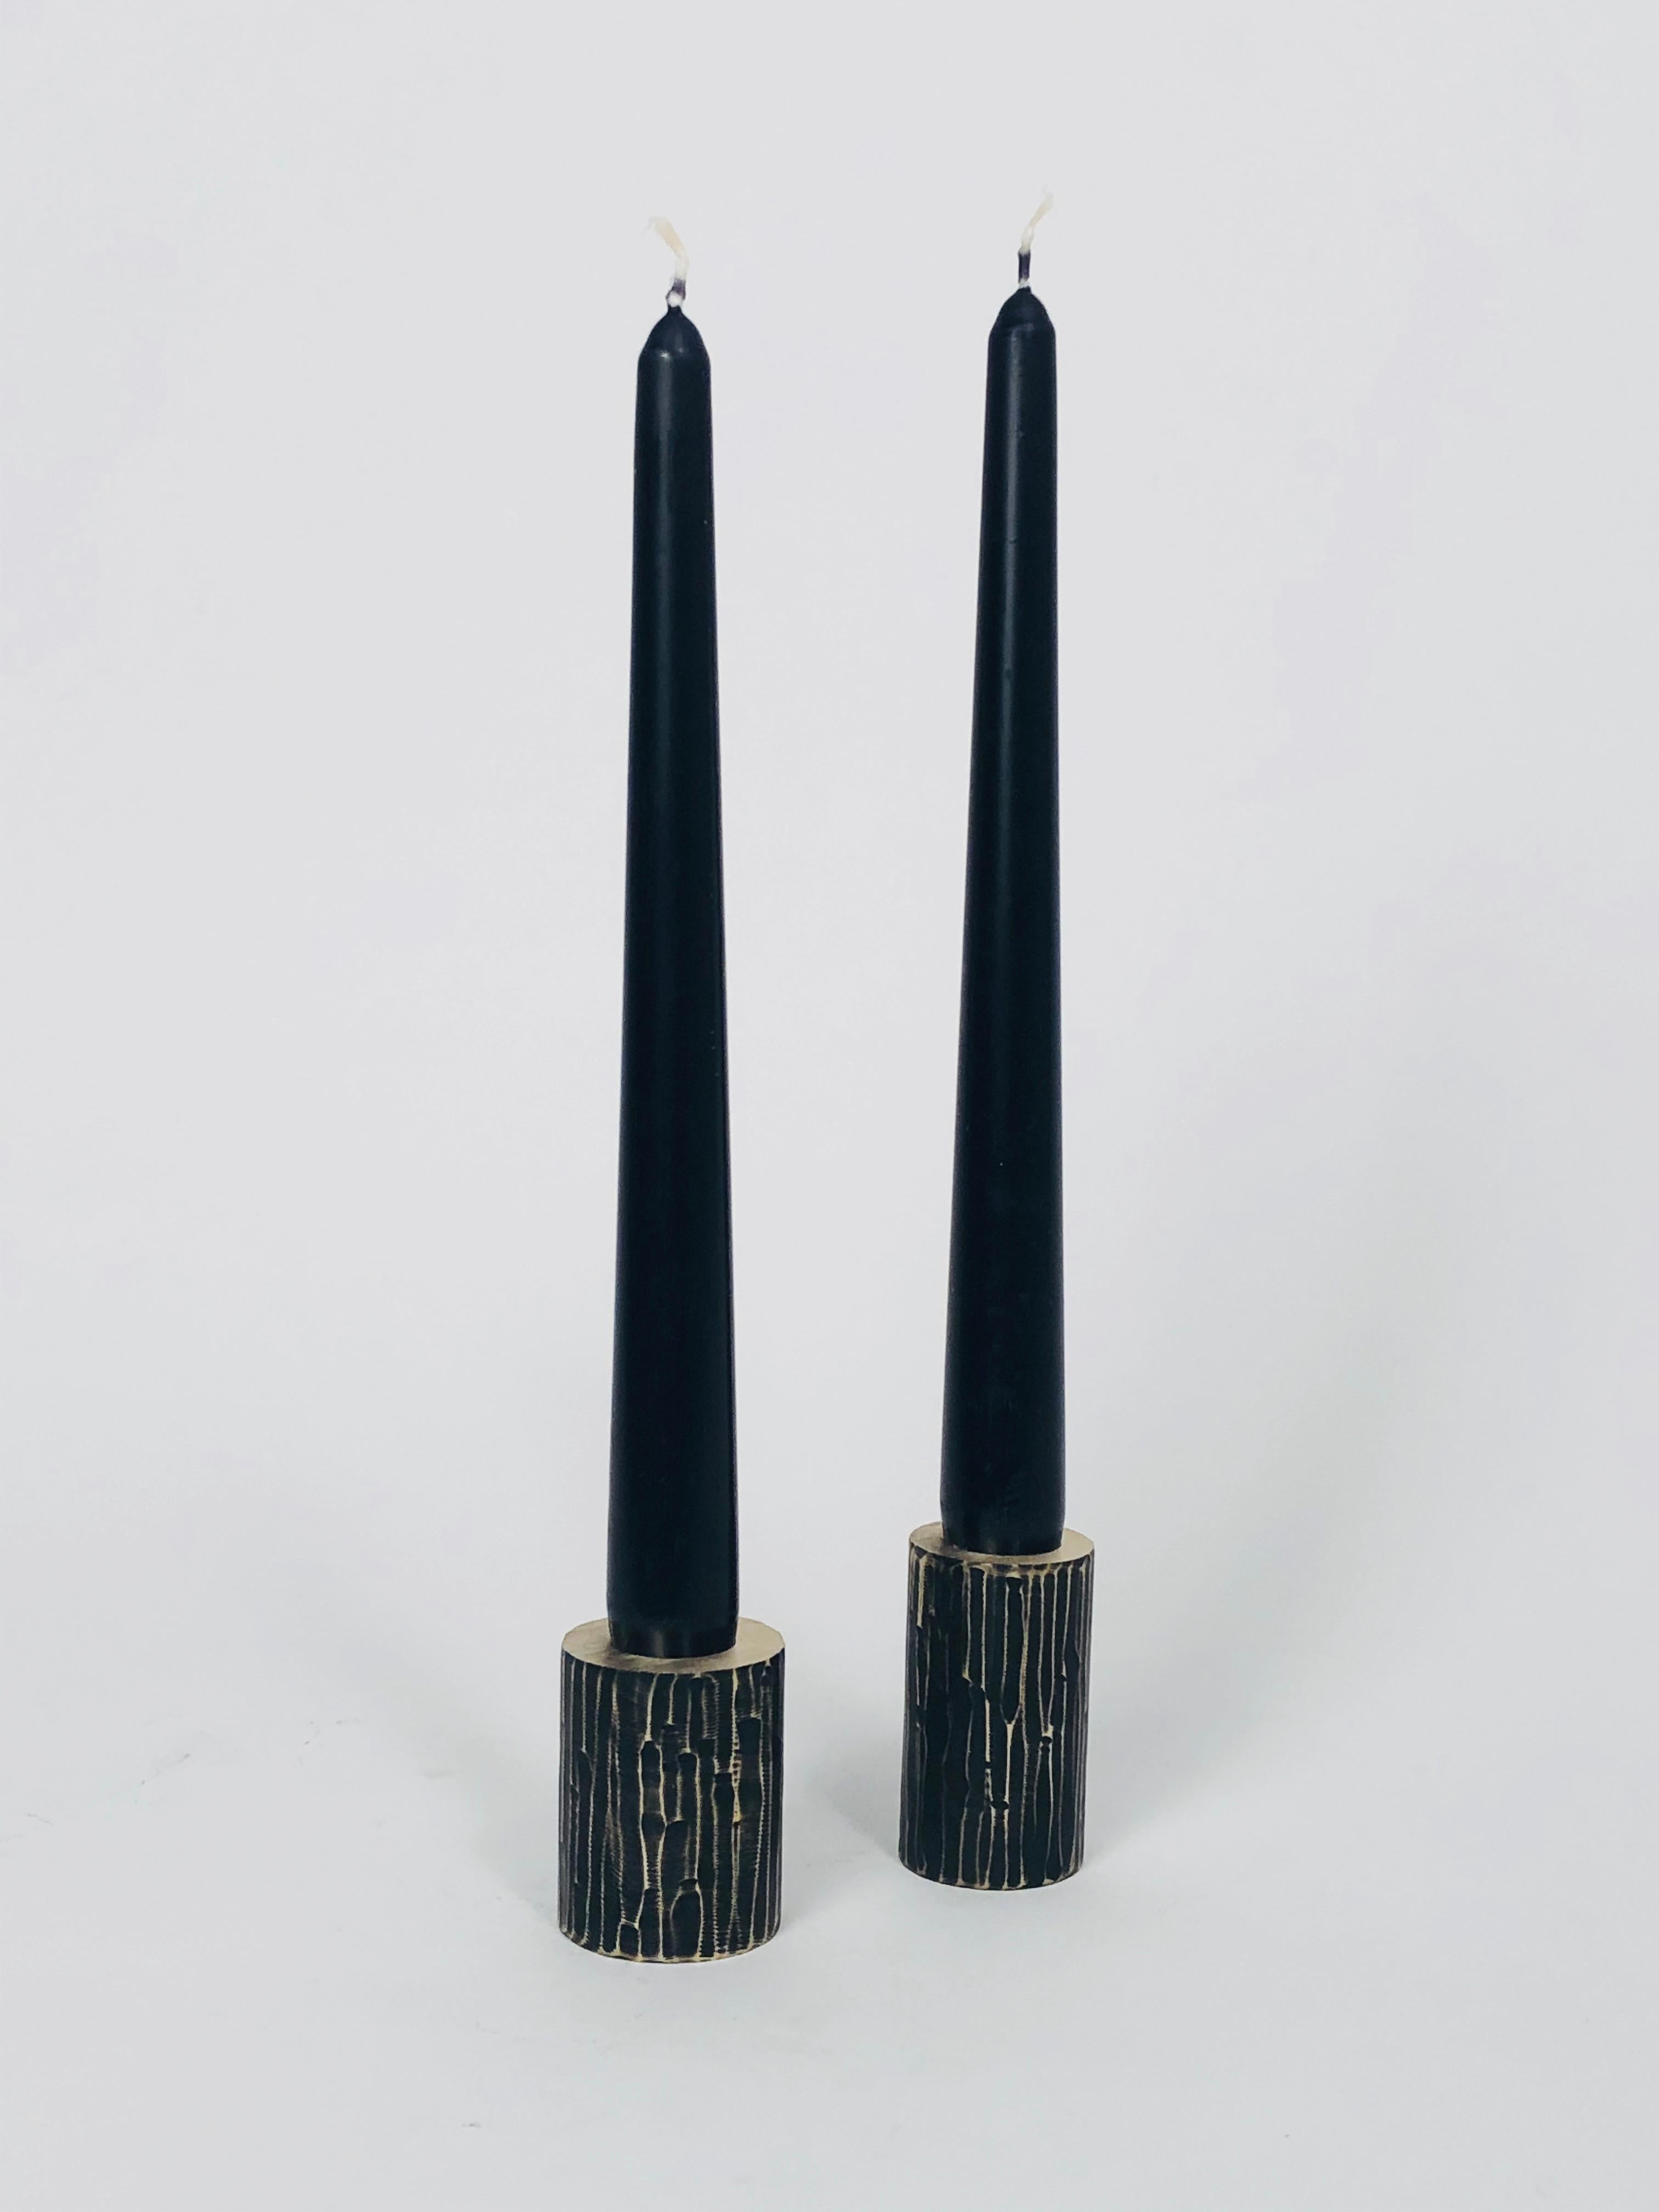 Set of 2 solid brass sculpted candleholders by William Guillon 
Each is signed William Guillon
Dimensions: Diameter 4 x height 5 cm
 Diameter 3.5 x height 6 cm
Materials: Solid brass raw finish or patinated black, with polished edge
Hand-sculpted in